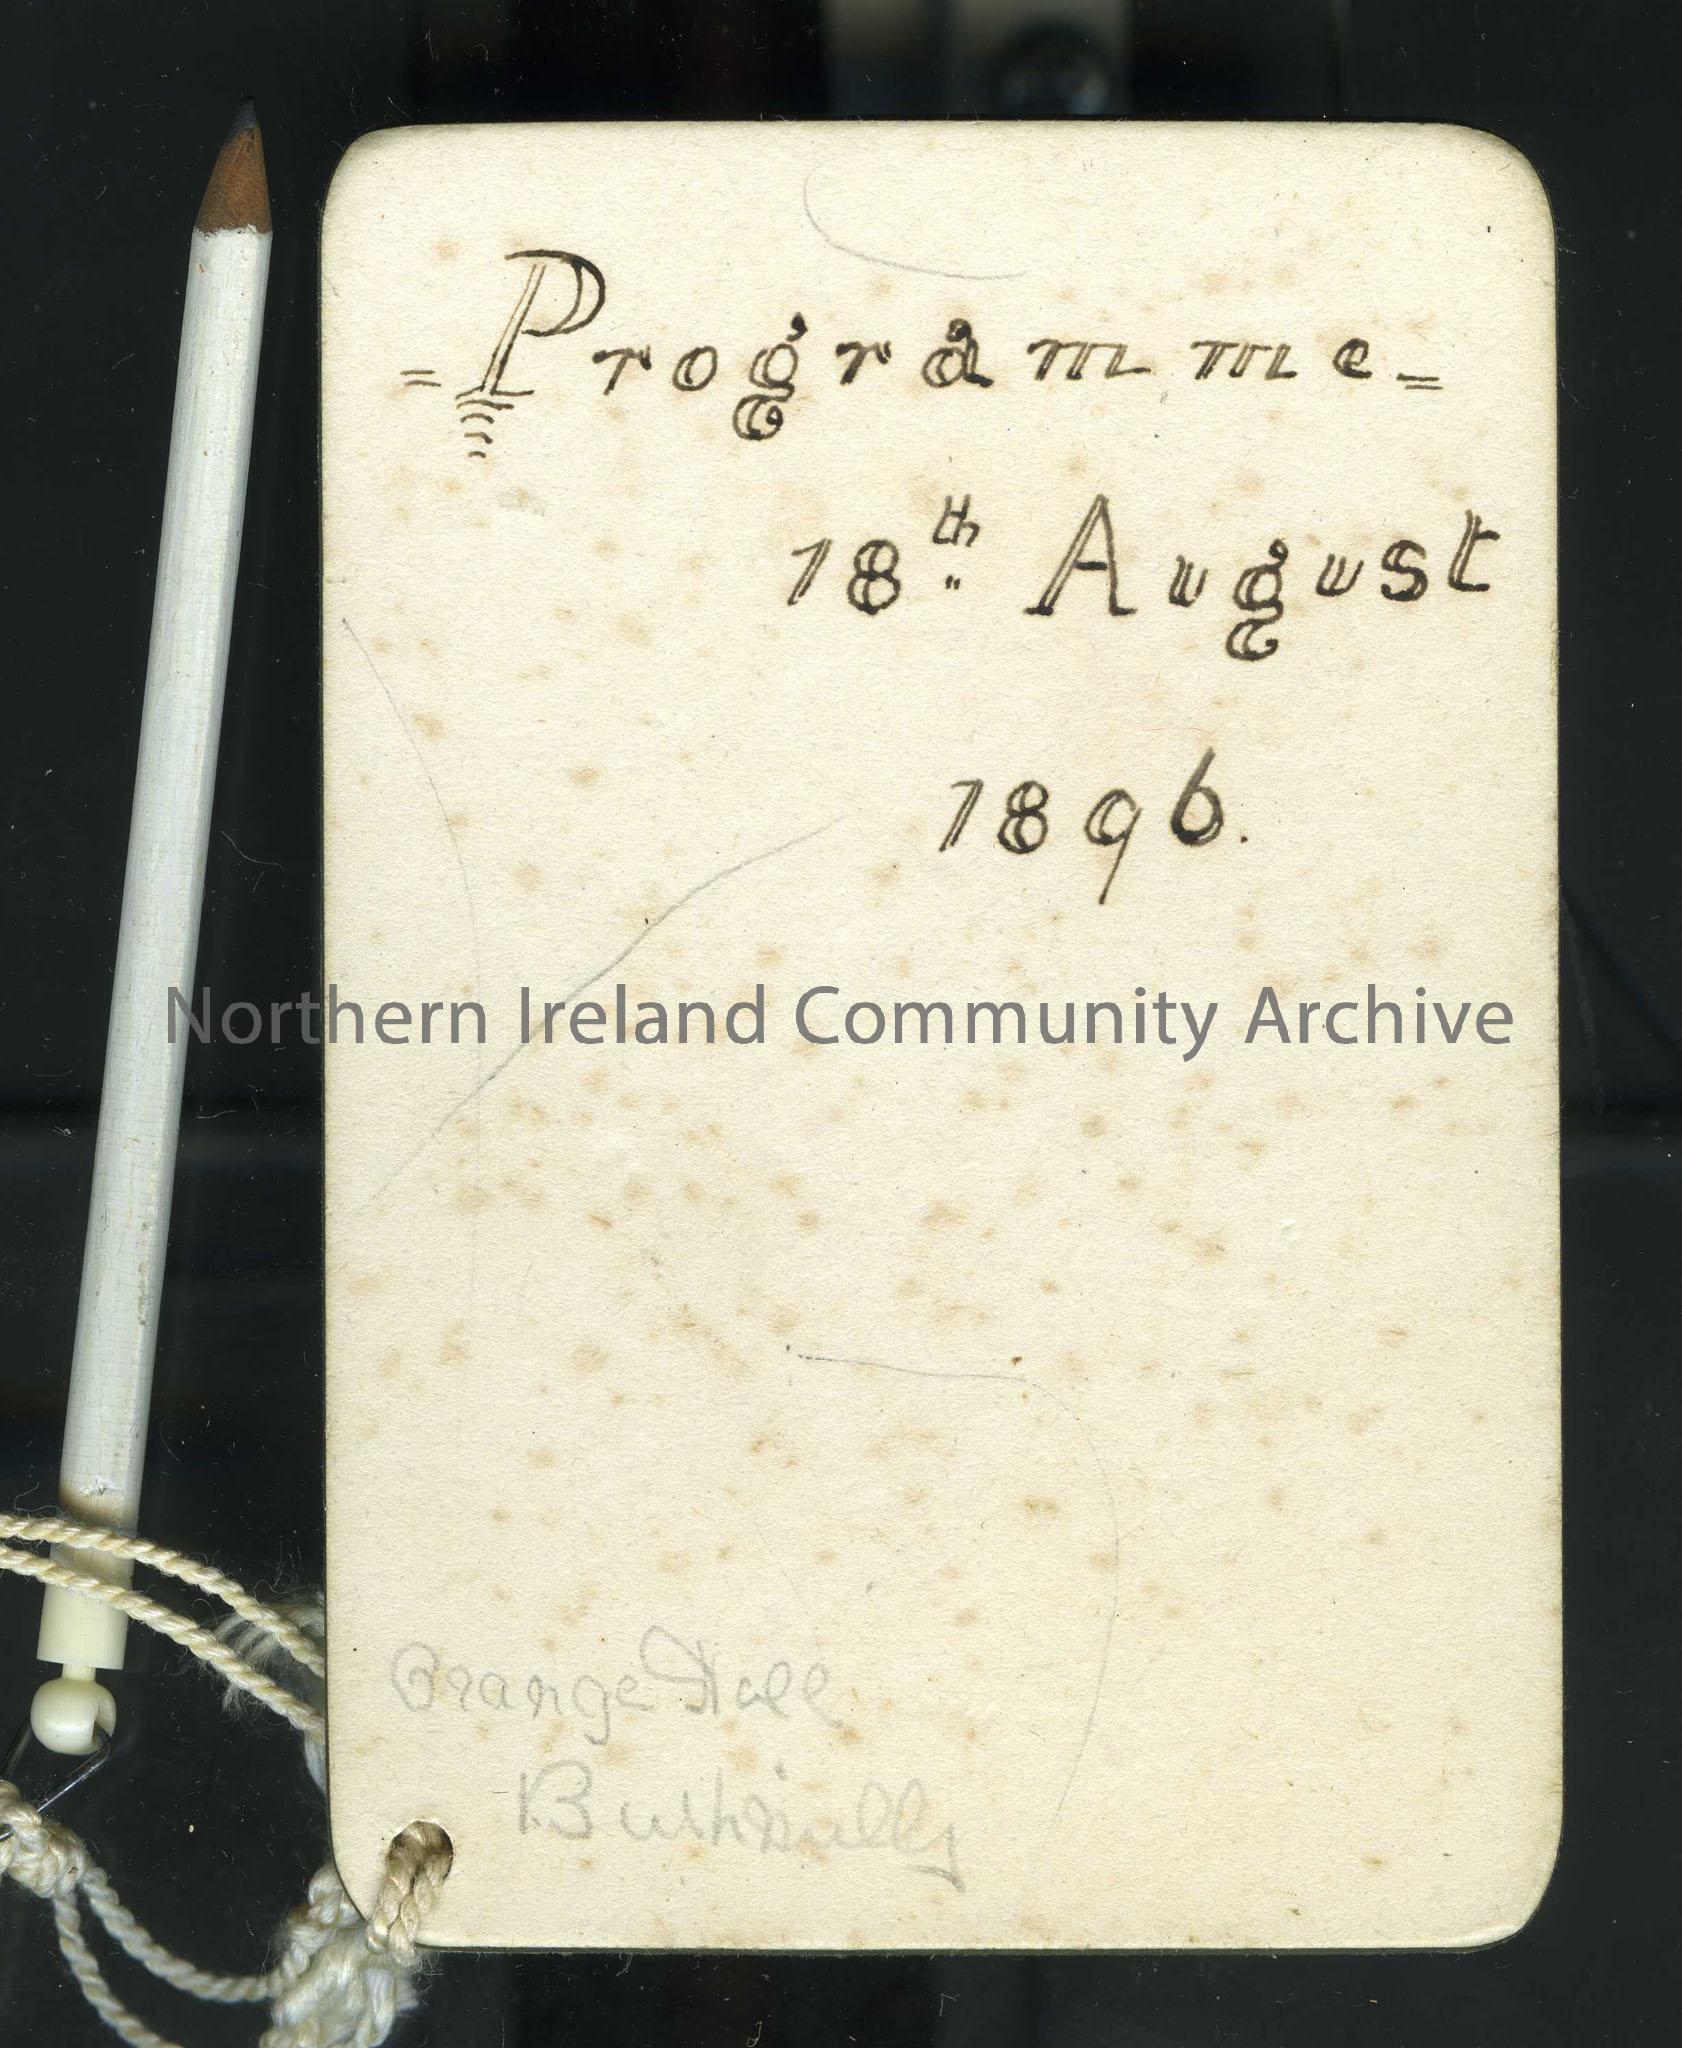 Dance card or programme.  Dated 18th August, 1896.  Names on back and pencil attached.